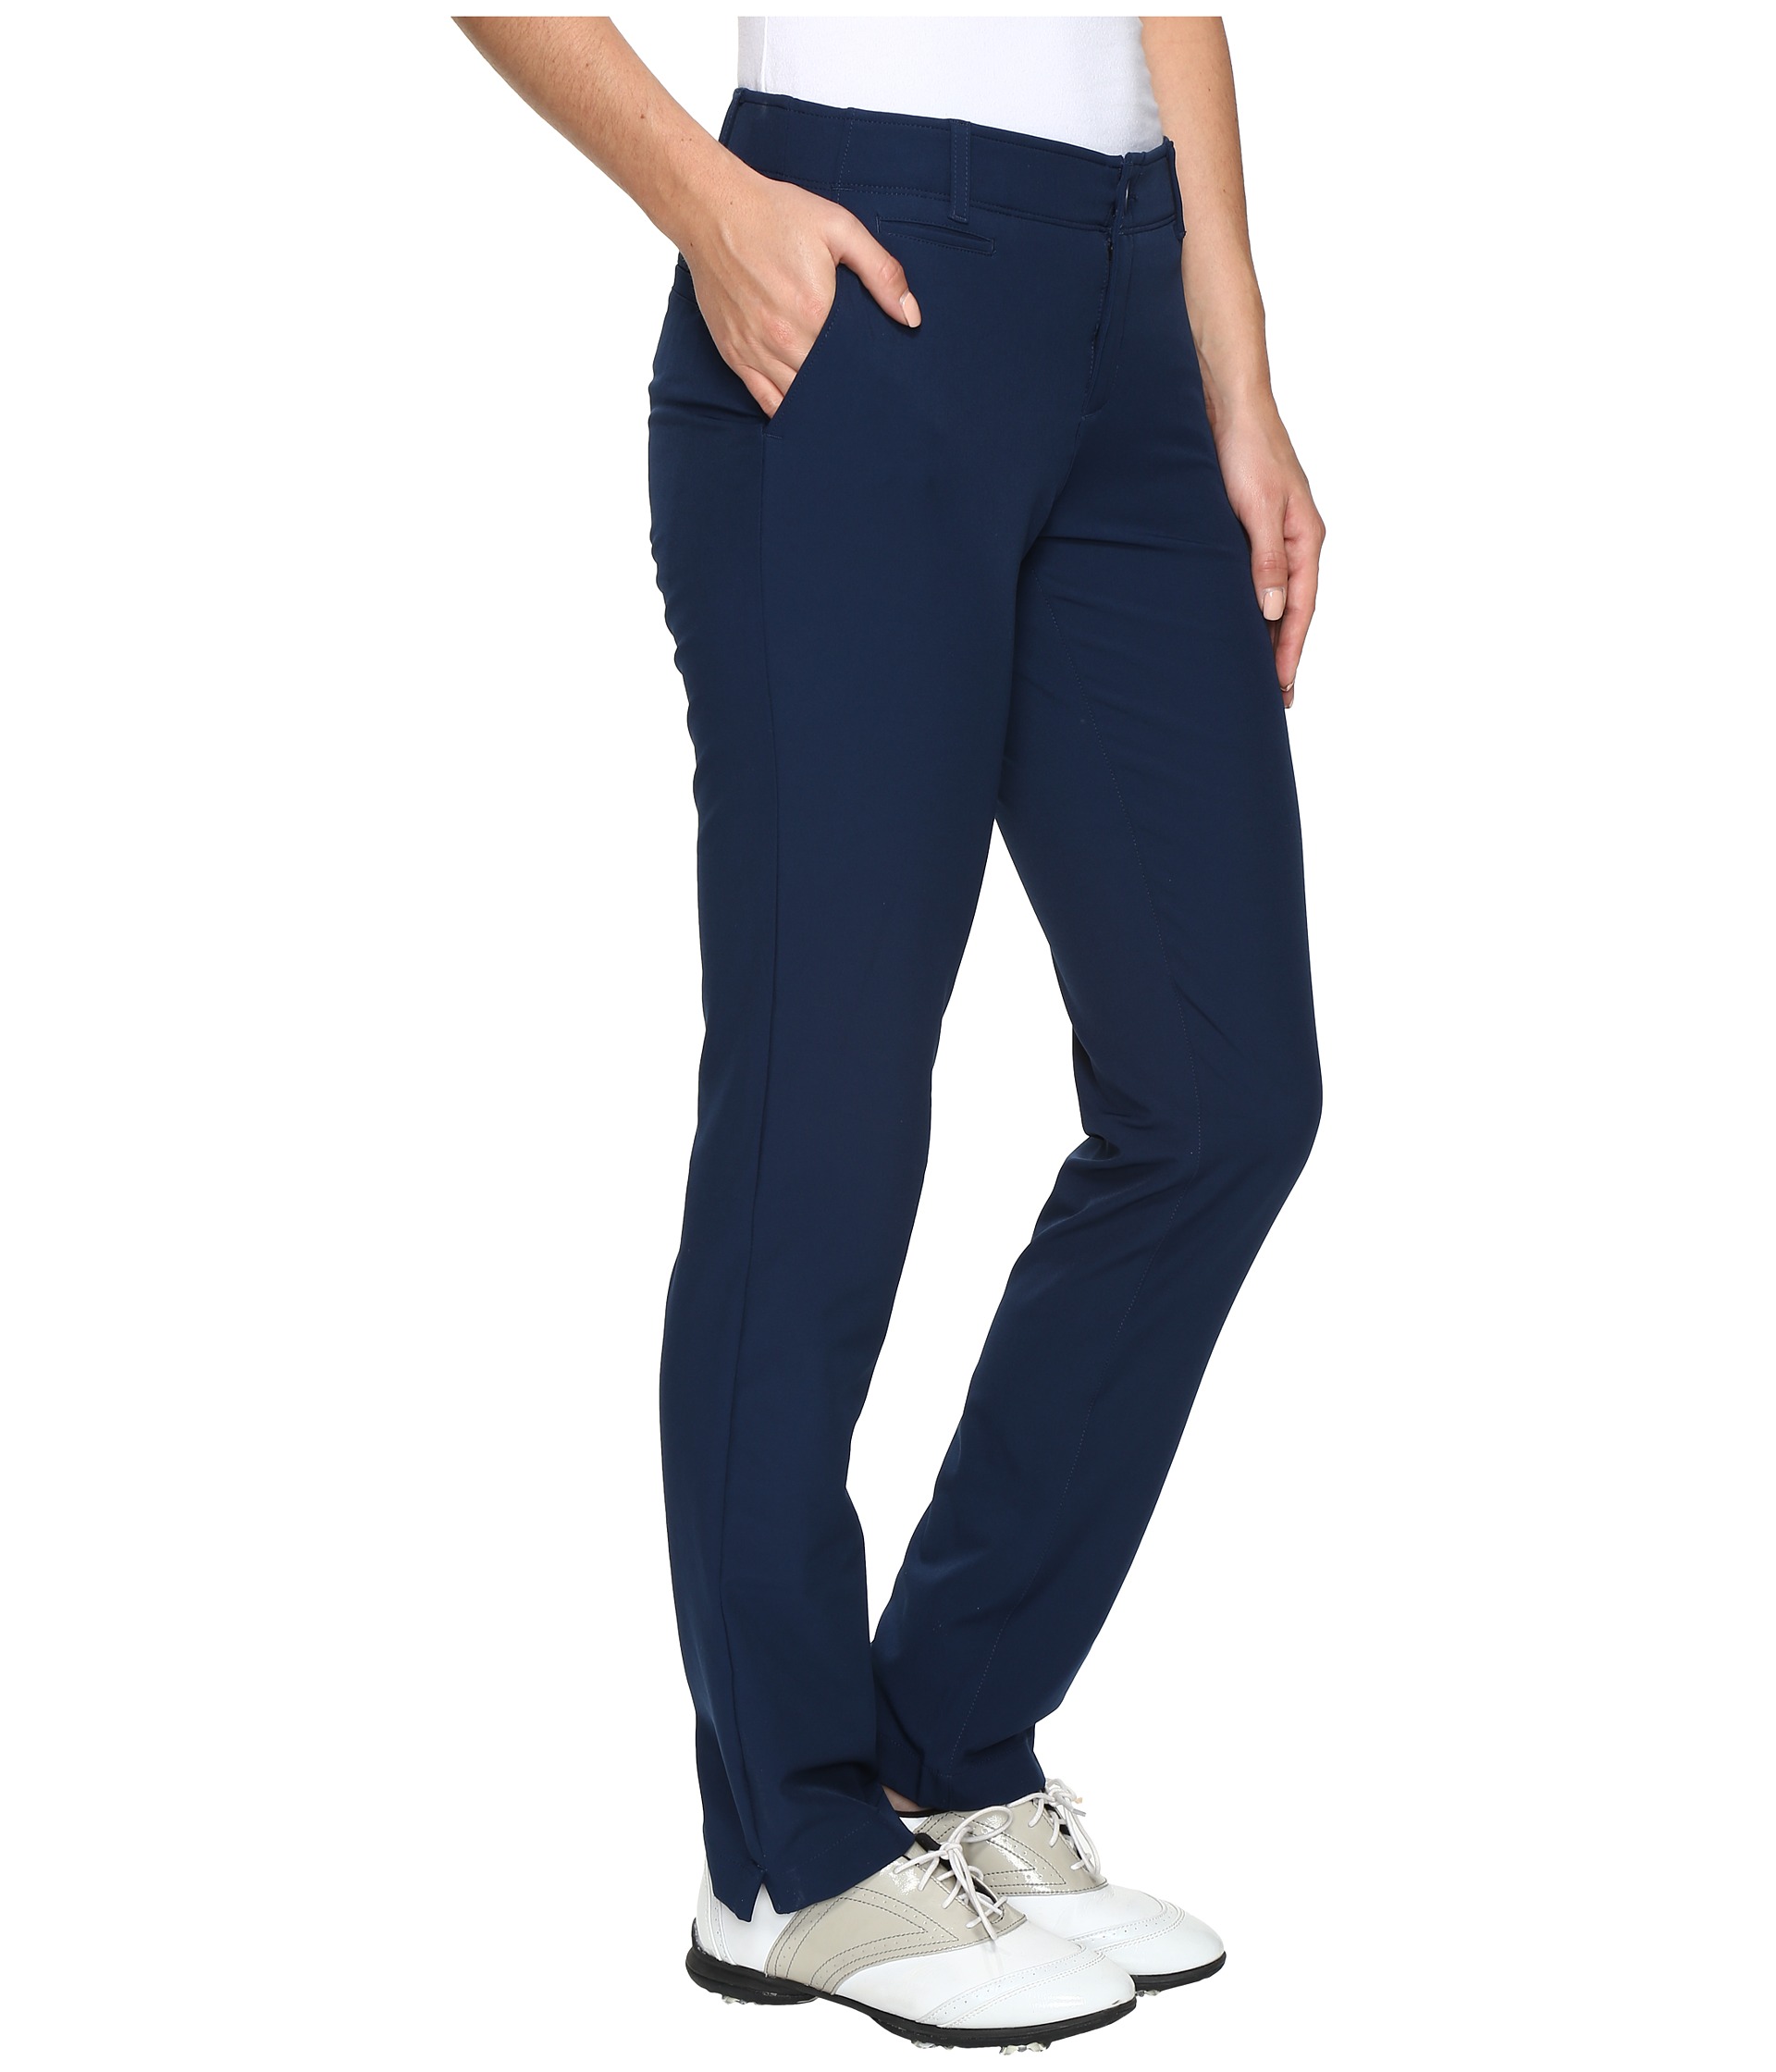 Under Armour Golf Links Pants at Zappos.com